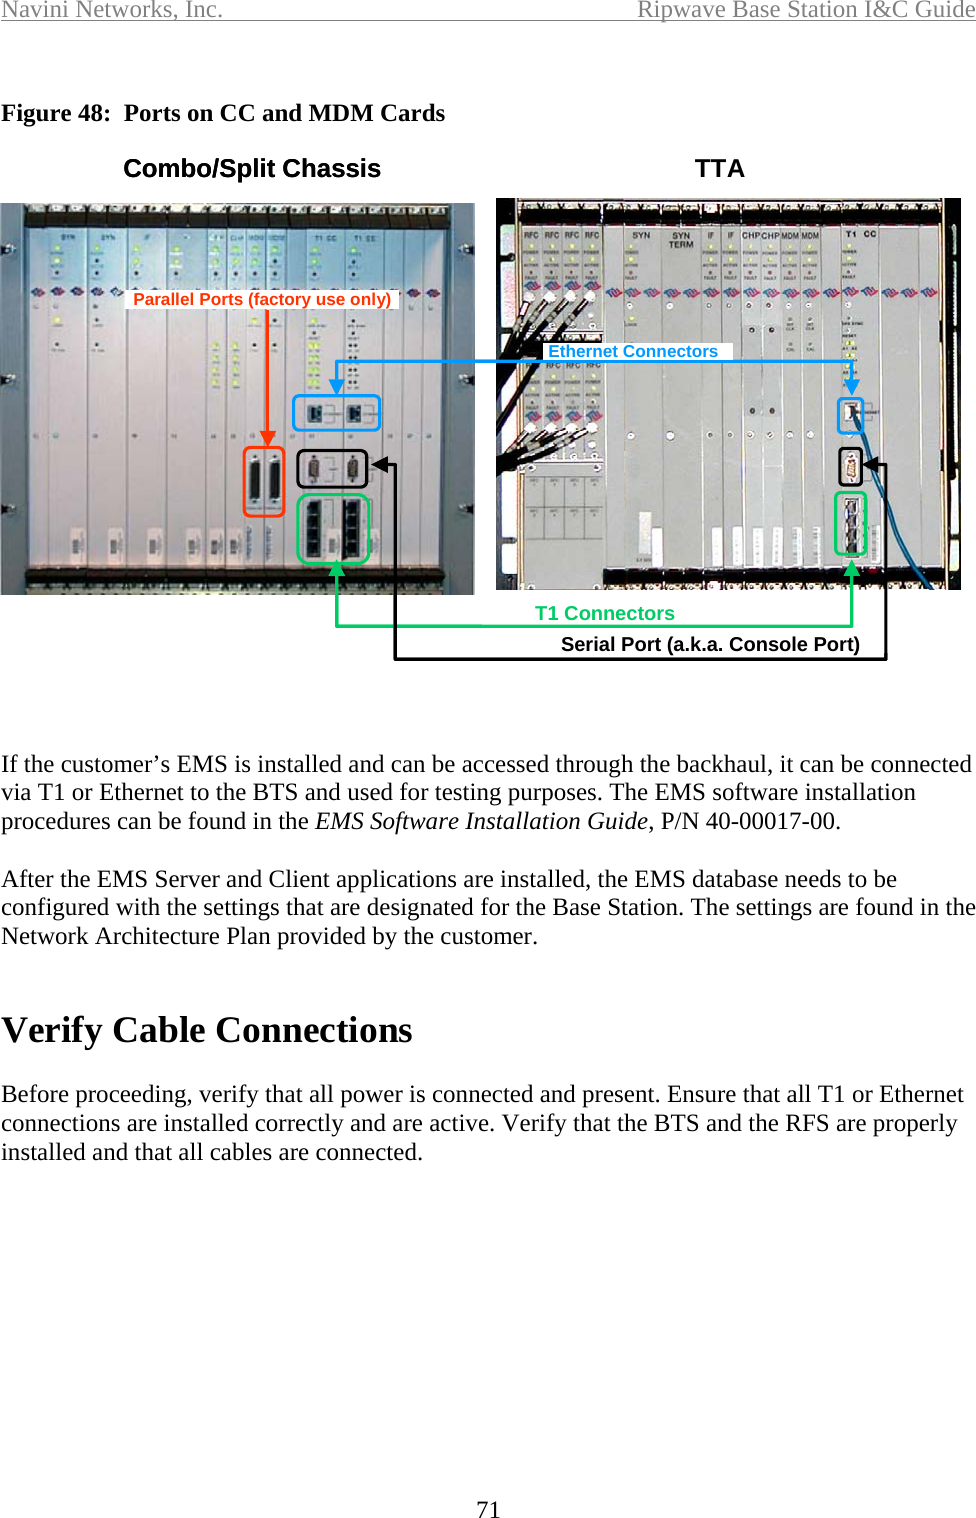 Navini Networks, Inc.  Ripwave Base Station I&amp;C Guide  71  Figure 48:  Ports on CC and MDM Cards    If the customer’s EMS is installed and can be accessed through the backhaul, it can be connected via T1 or Ethernet to the BTS and used for testing purposes. The EMS software installation procedures can be found in the EMS Software Installation Guide, P/N 40-00017-00.  After the EMS Server and Client applications are installed, the EMS database needs to be configured with the settings that are designated for the Base Station. The settings are found in the Network Architecture Plan provided by the customer.    Verify Cable Connections  Before proceeding, verify that all power is connected and present. Ensure that all T1 or Ethernet connections are installed correctly and are active. Verify that the BTS and the RFS are properly installed and that all cables are connected.  Combo/Split Chassis TTASerial Port (a.k.a. Console Port)T1 ConnectorsEthernet ConnectorsParallel Ports (factory use only)Combo/Split Chassis TTASerial Port (a.k.a. Console Port)T1 ConnectorsEthernet ConnectorsEthernet ConnectorsParallel Ports (factory use only)Parallel Ports (factory use only)